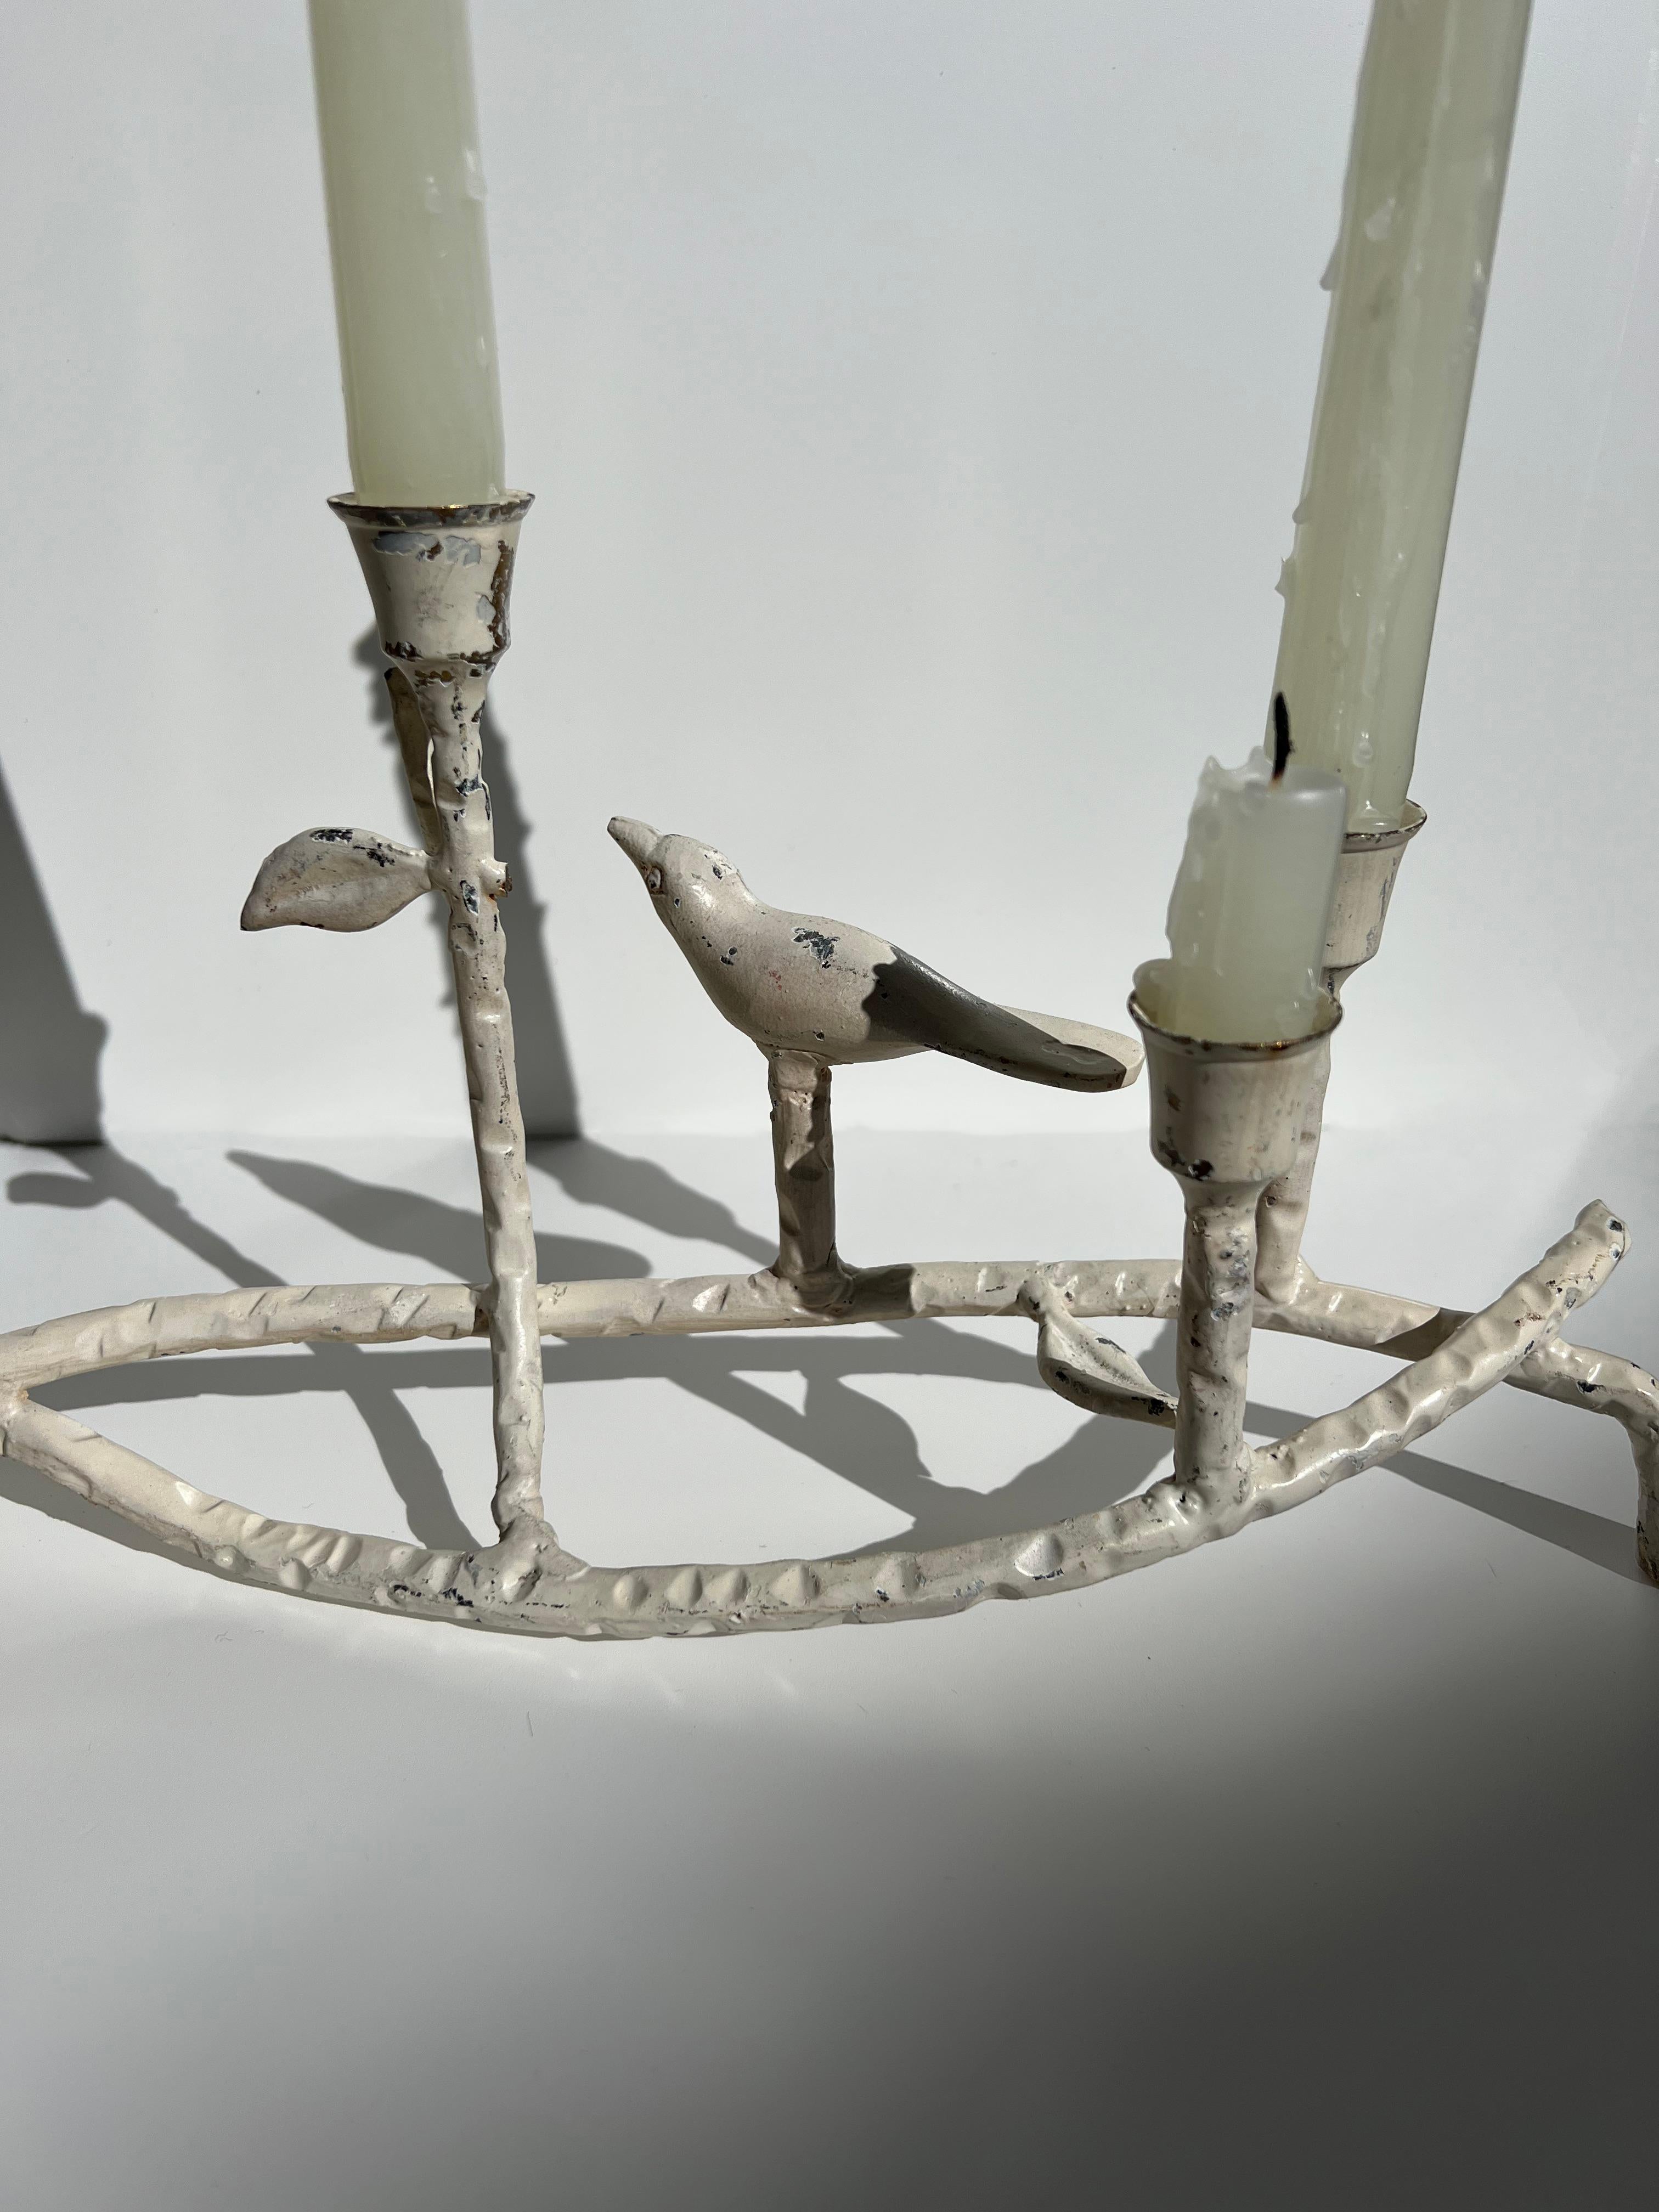 Enrich your decor with our exquisite vintage white ceramic candelabra, a showcase of intricate design and remarkable craftsmanship. This piece features a branch-like structure, adorned with delicate details such as a bird figure and leaf accents,